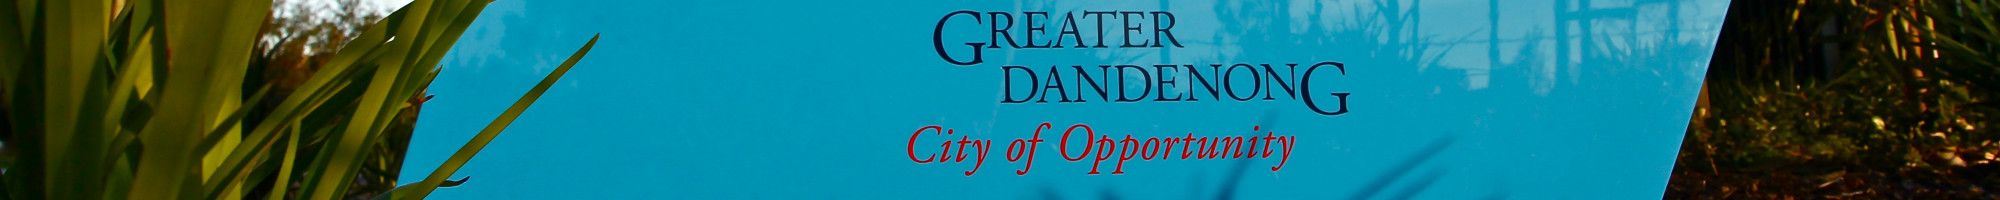 City of Greater Dandenong Logo on blue panel